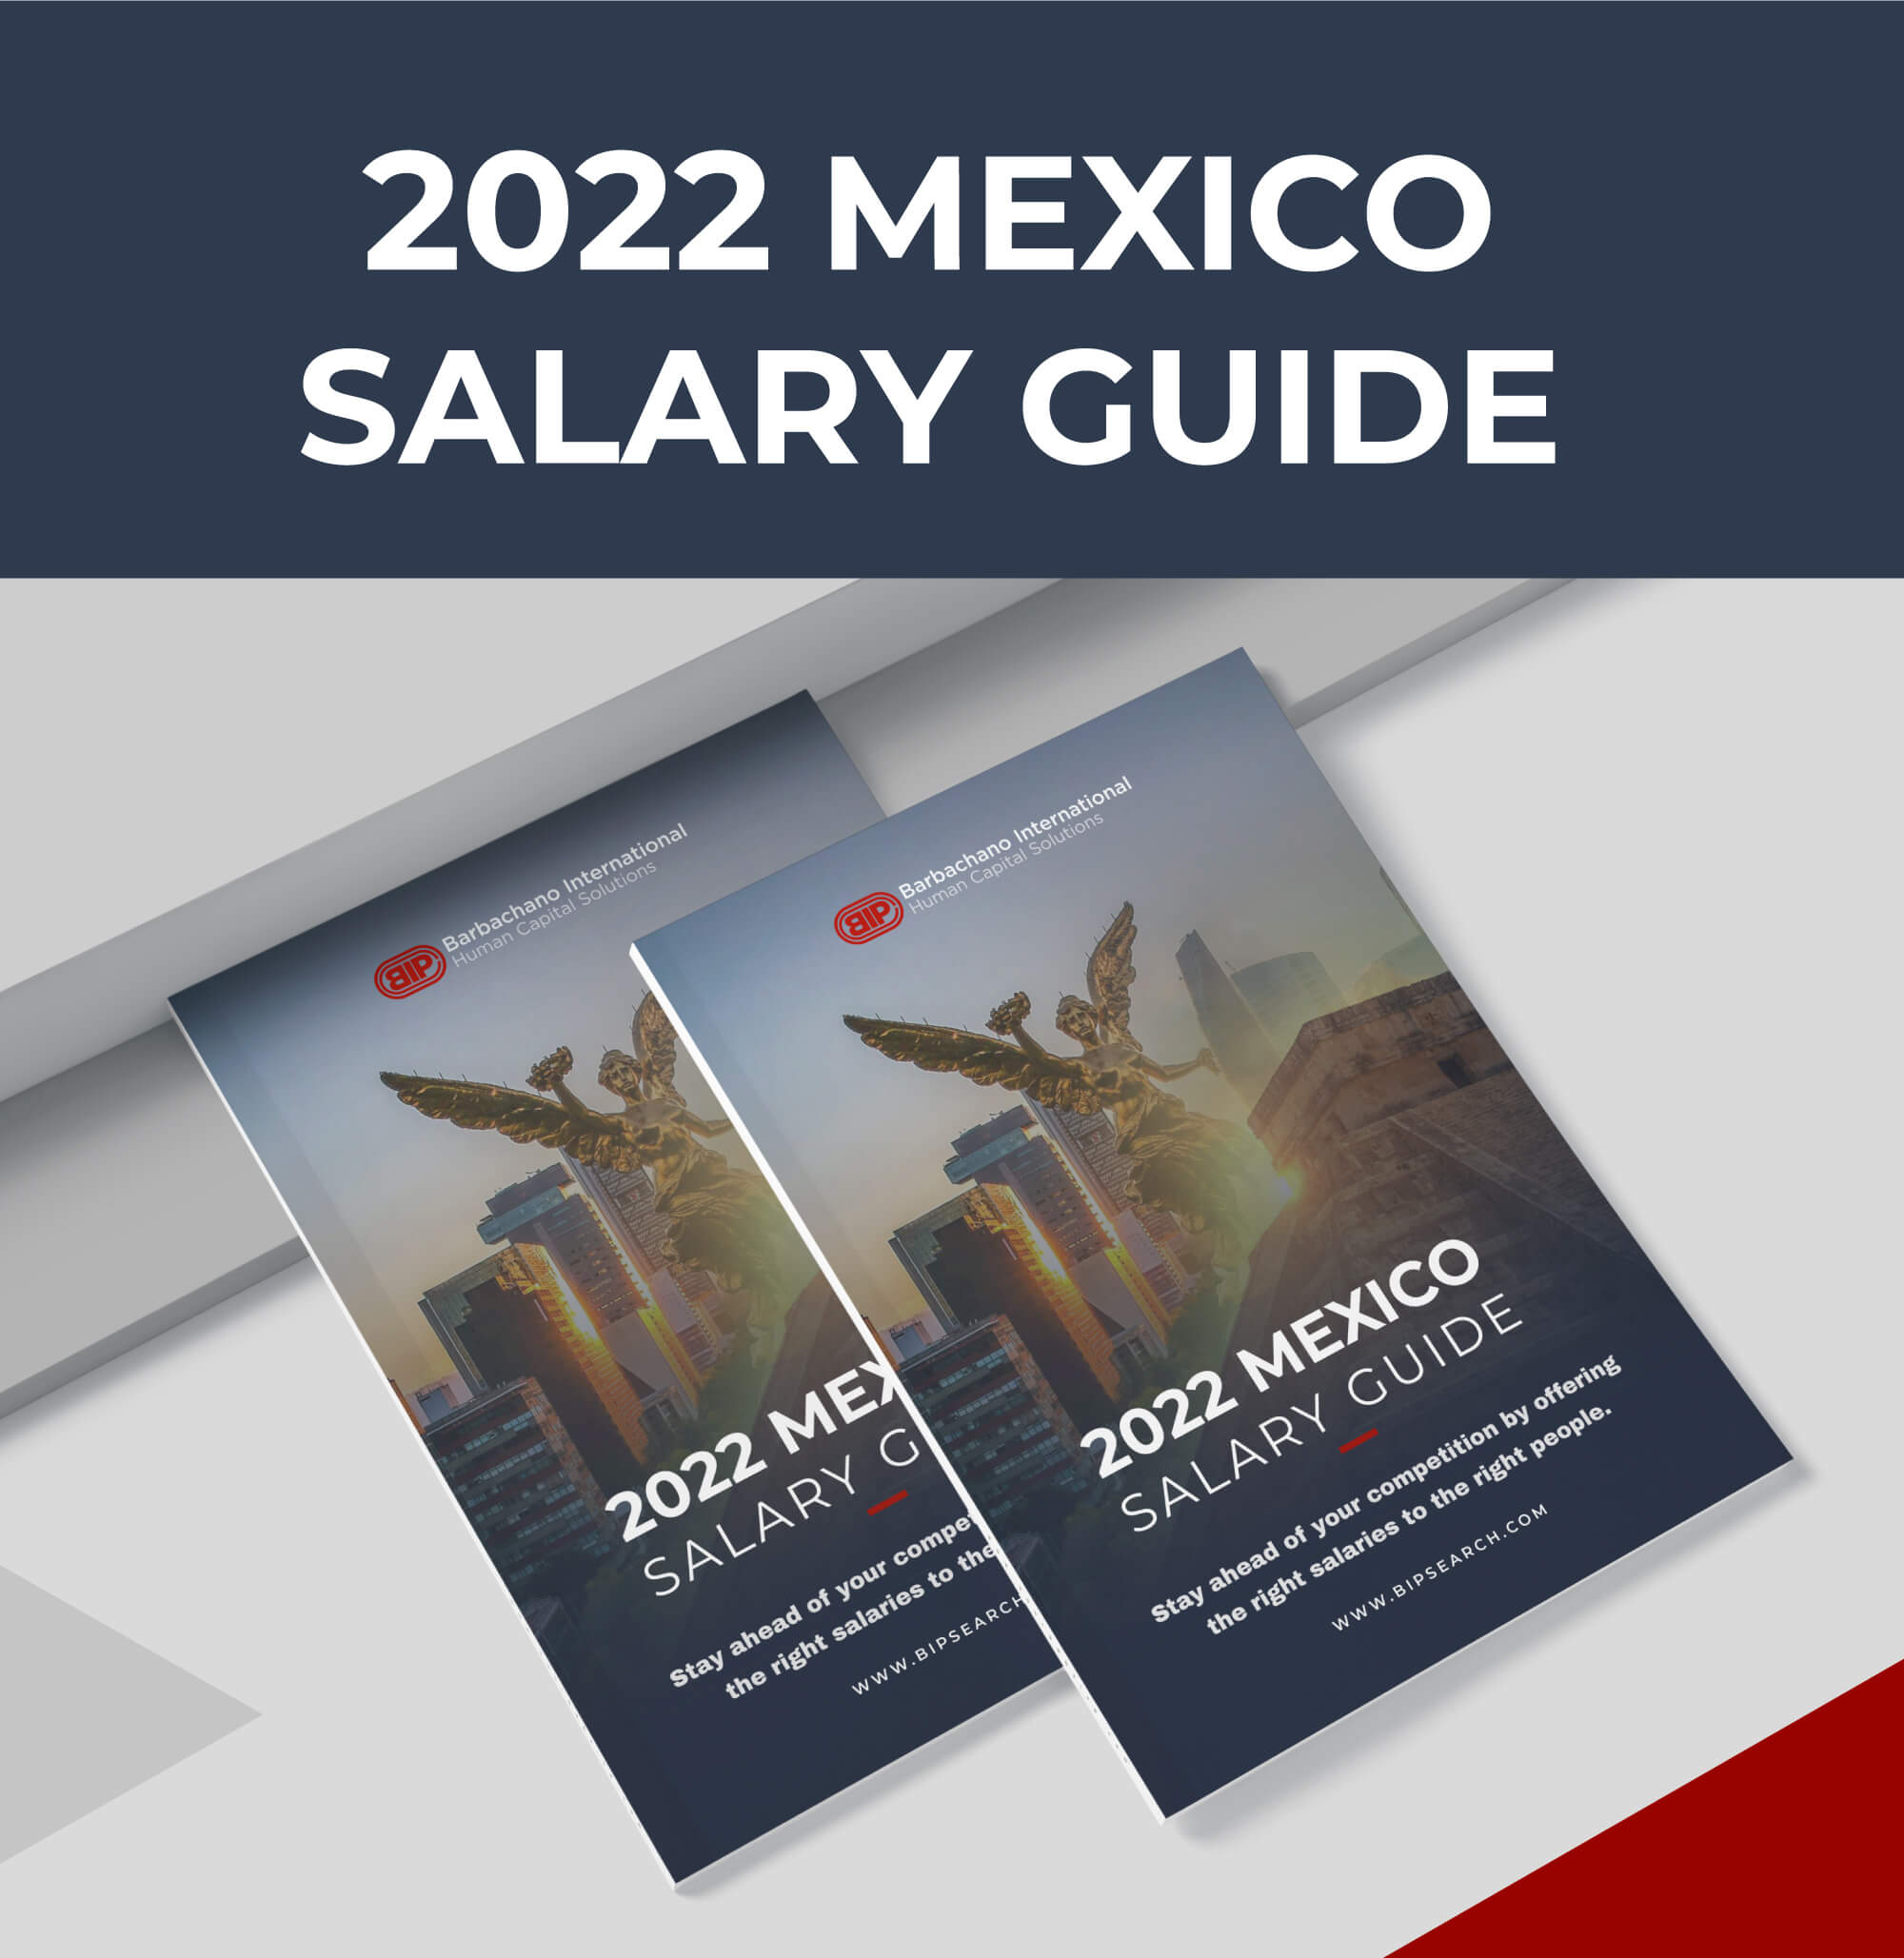 2022 Mexico Salary Guide